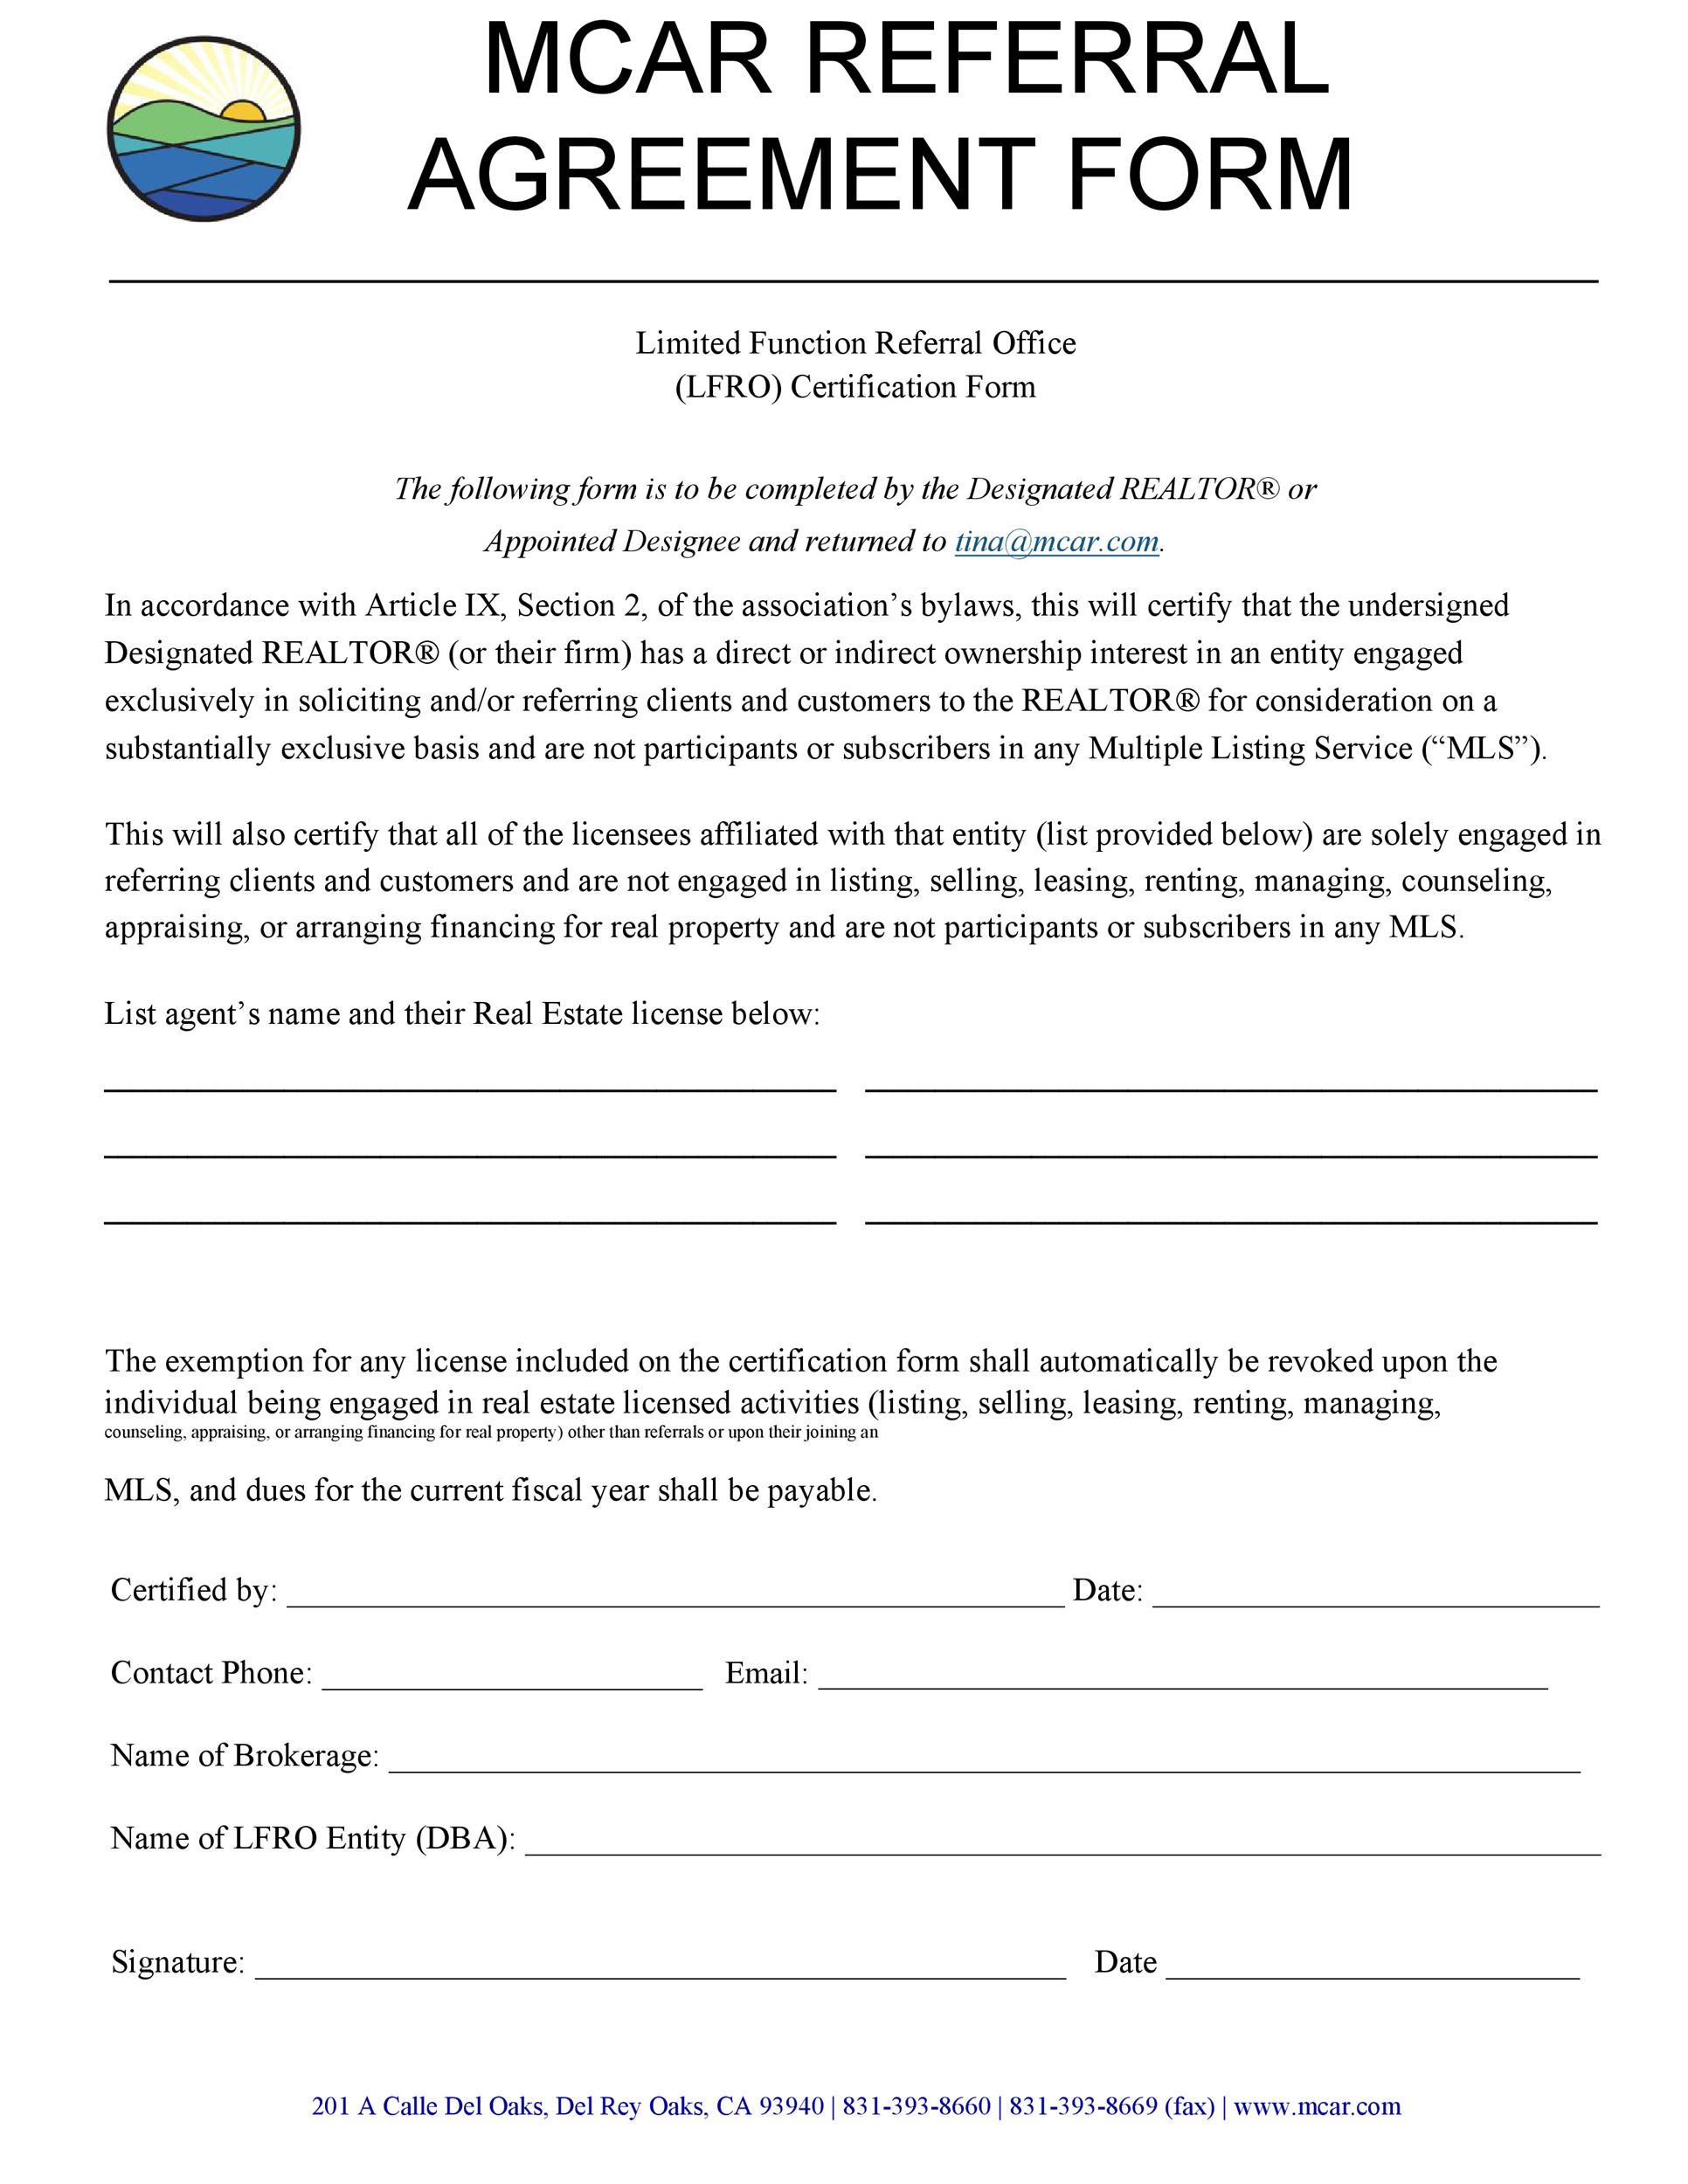 Free referral agreement template 36